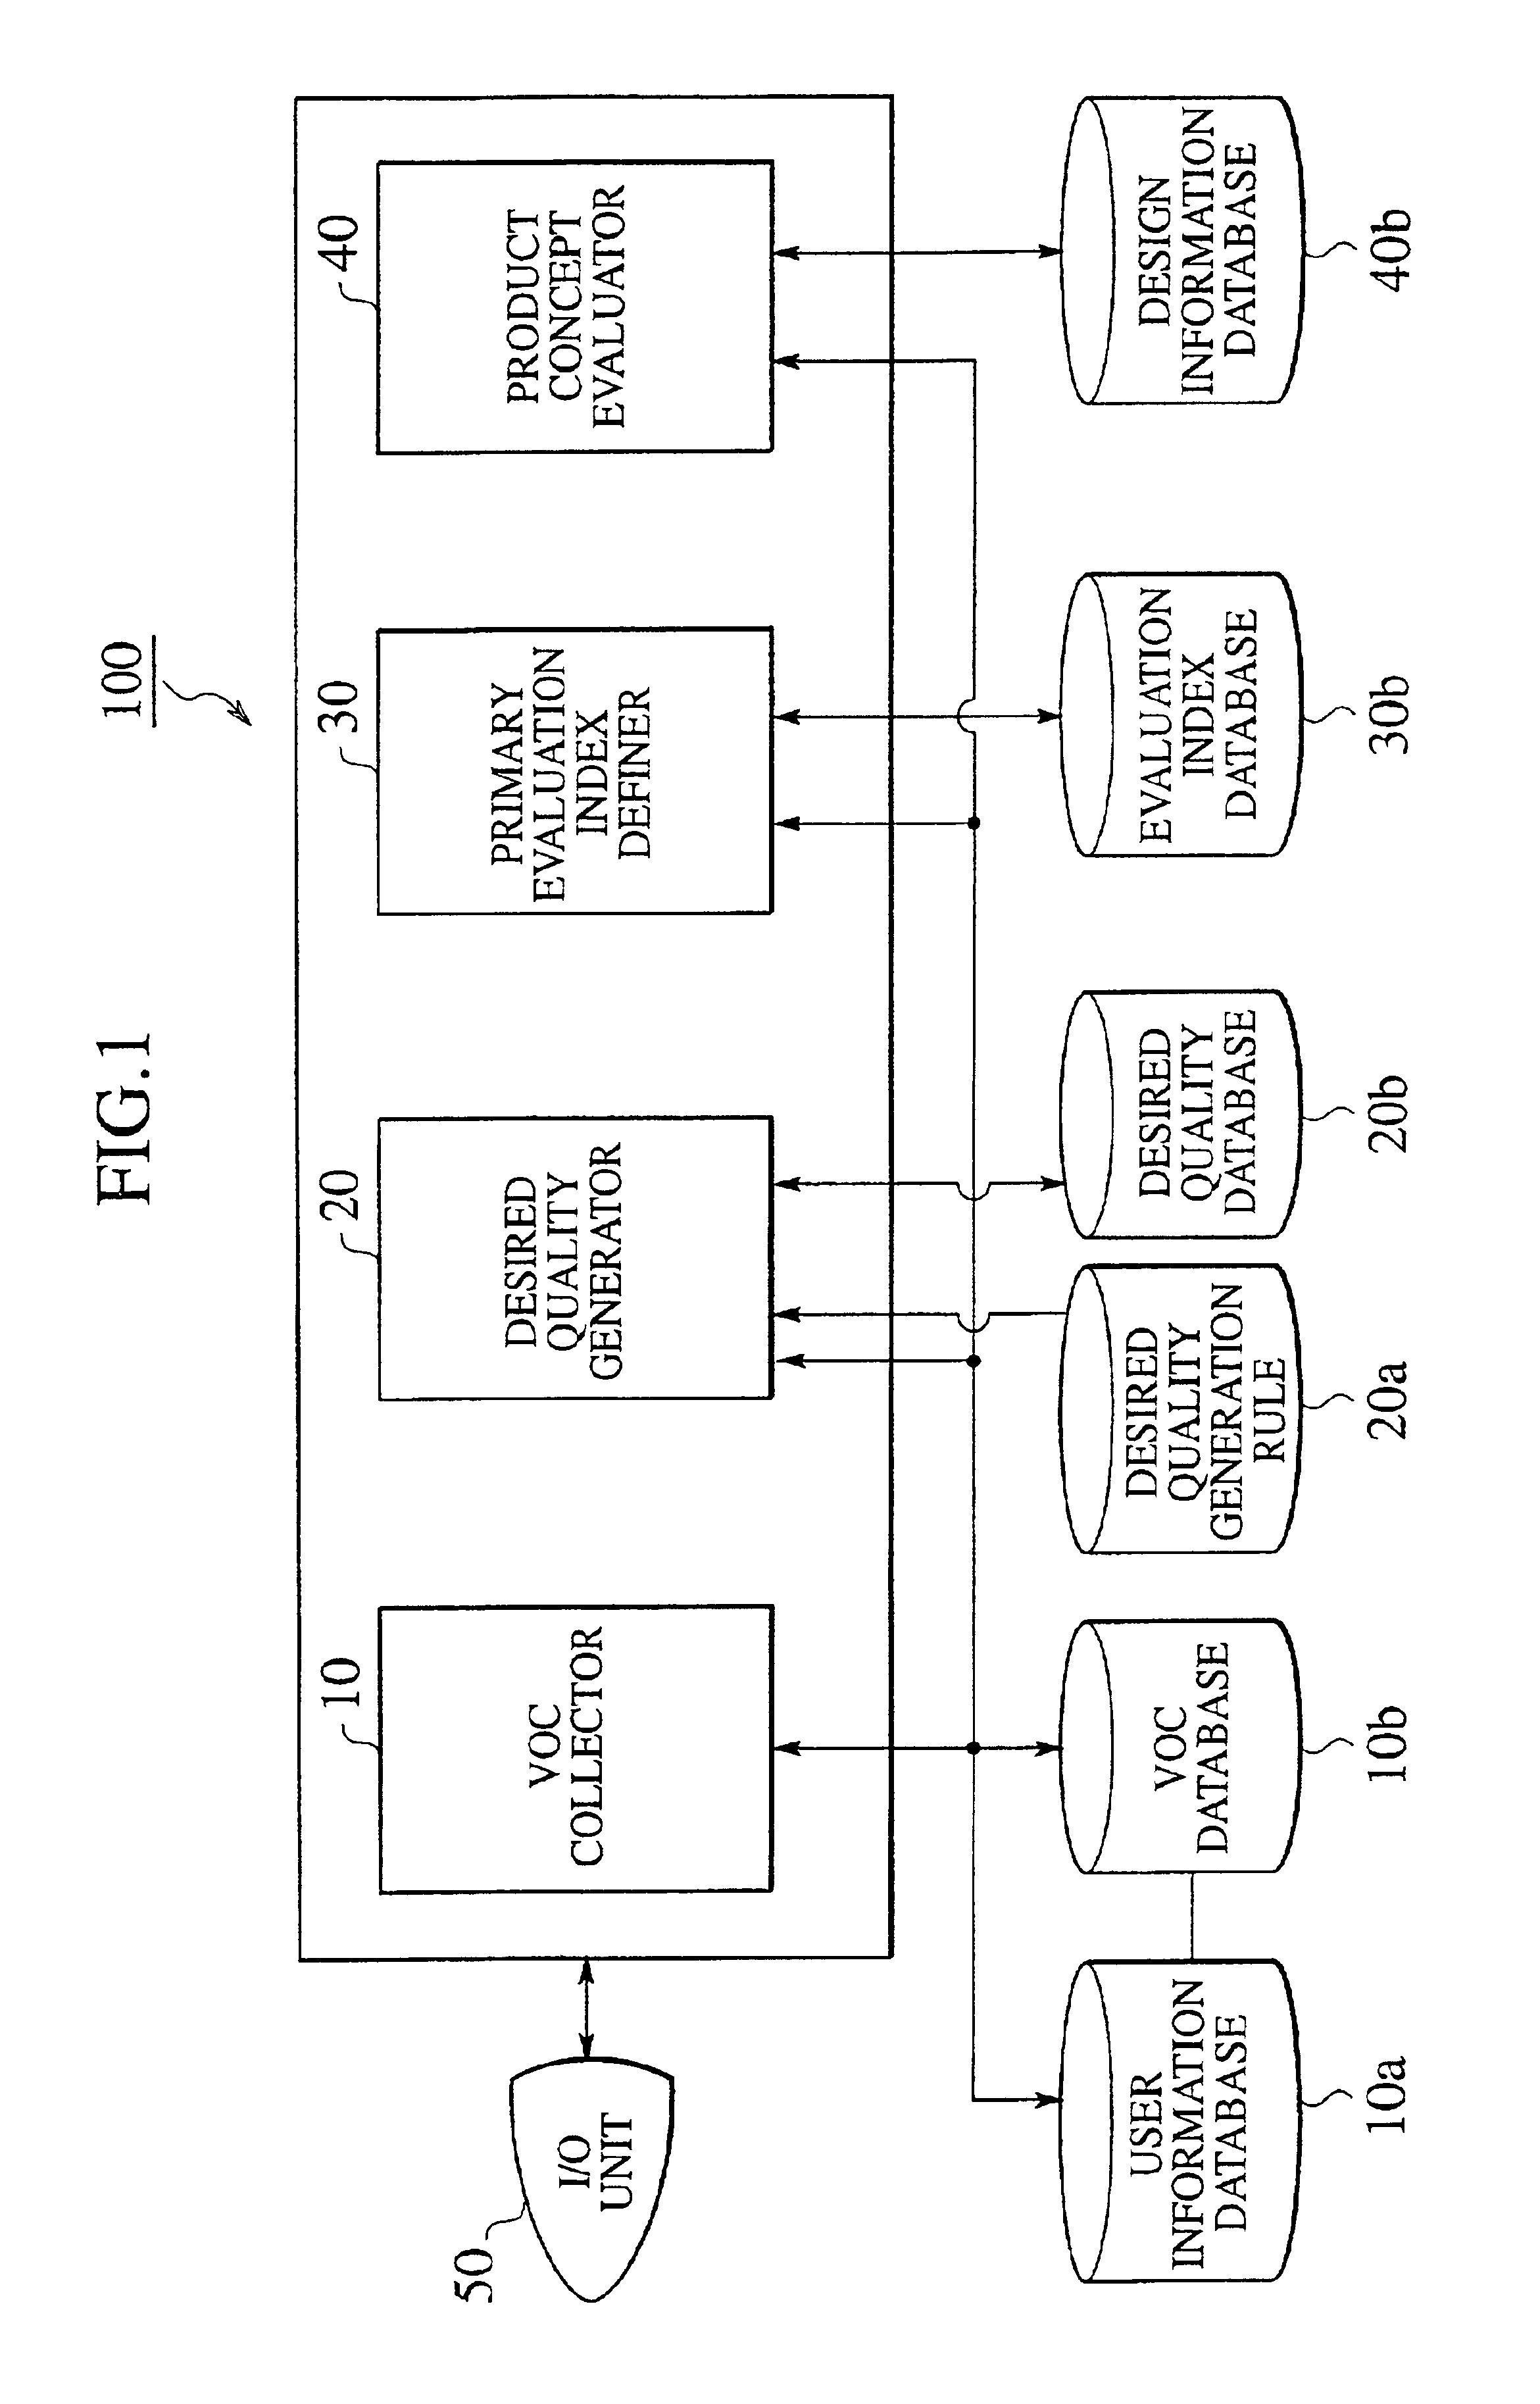 Product design process and product design apparatus